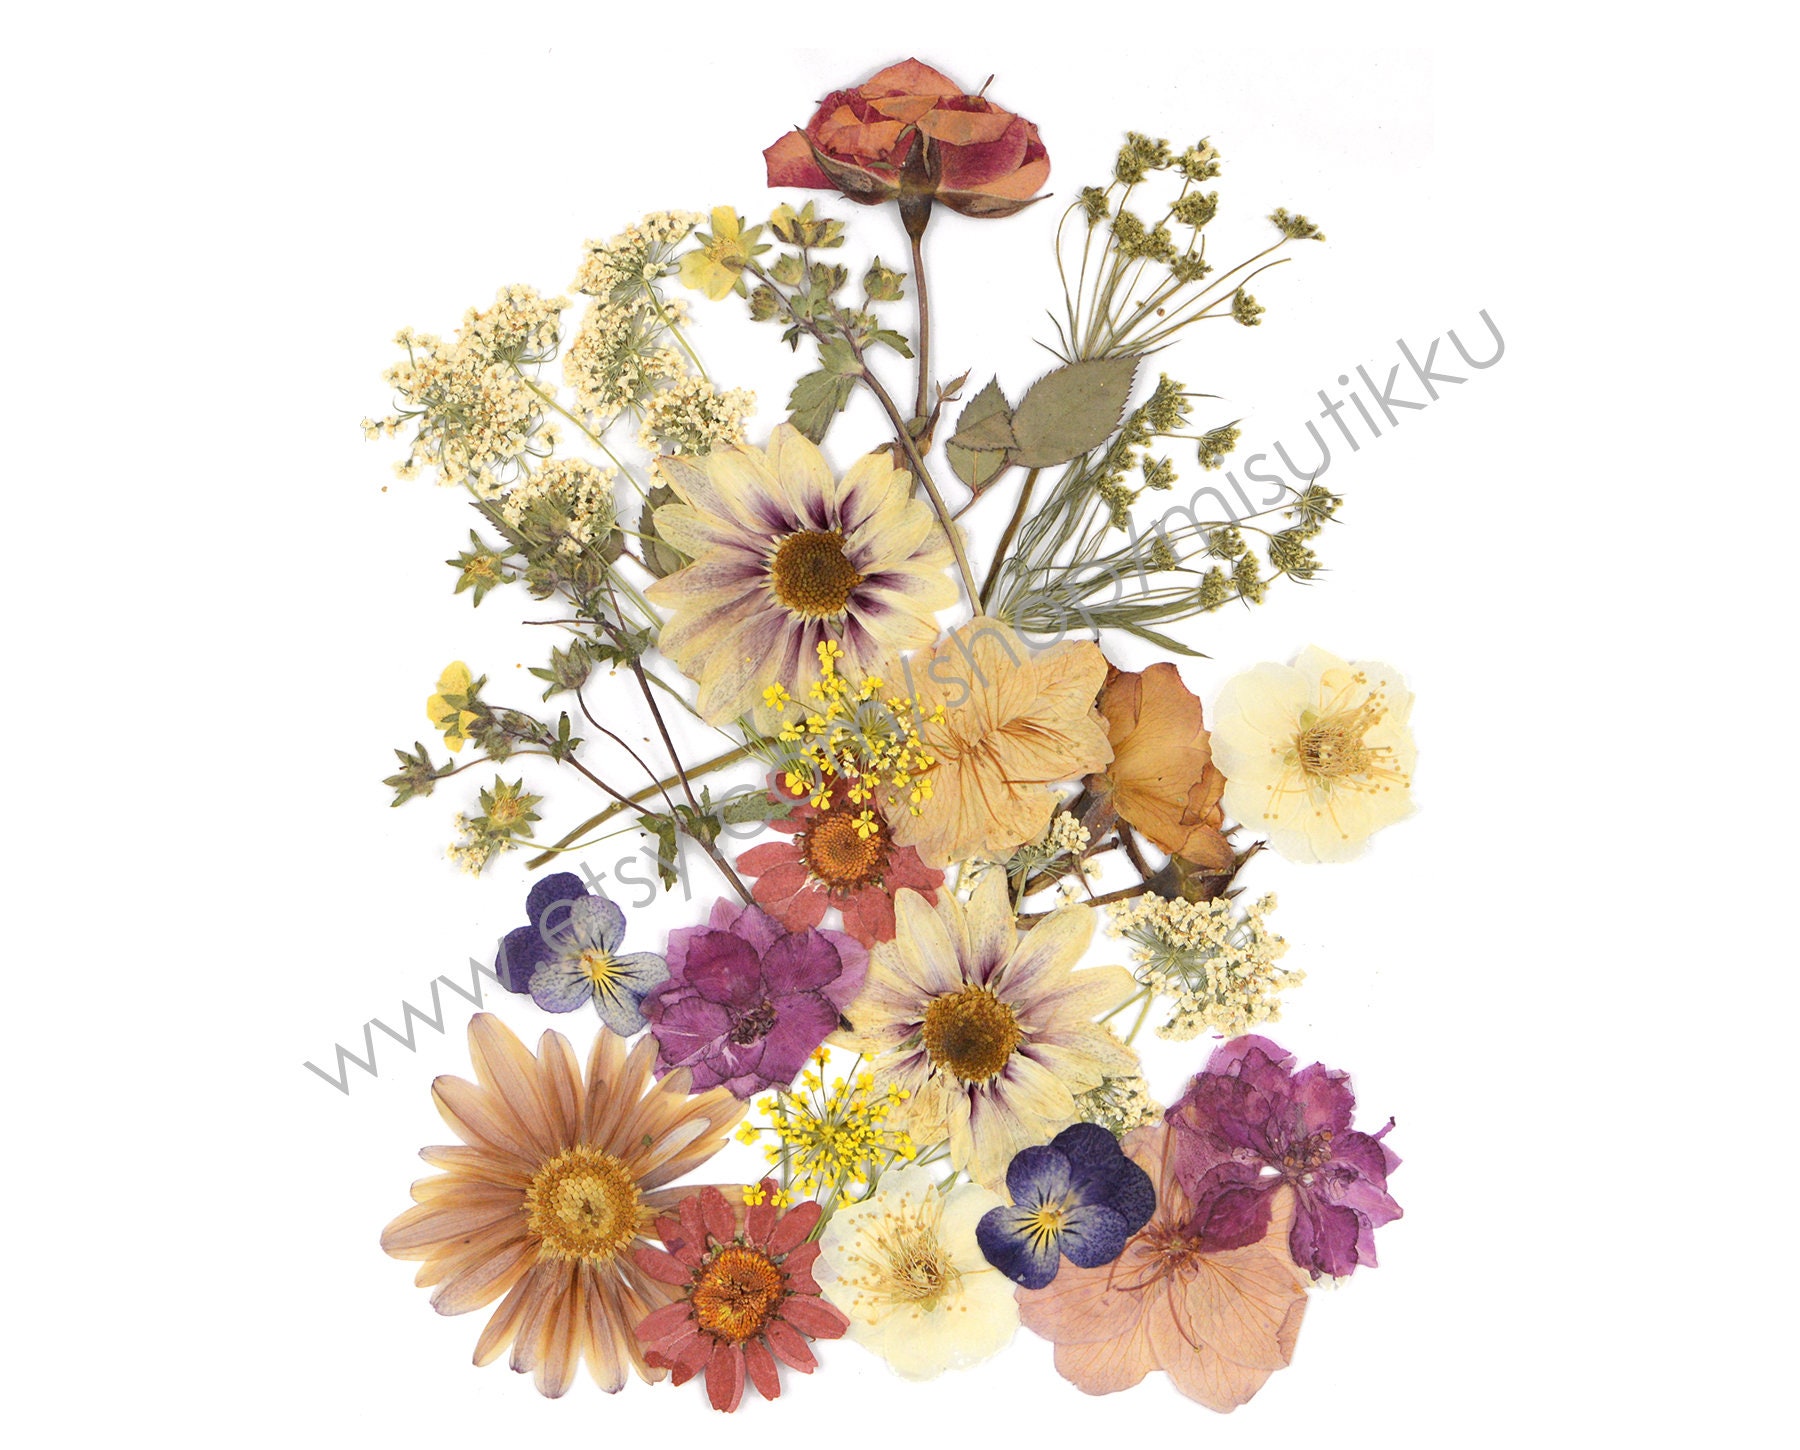 Dried Pressed Flowers For Crafts - Pressed Flowers Mix Pack - Dry Pressed  Flower Art - Dried Real Flowers - Card Making - 145x106mm - HM1029